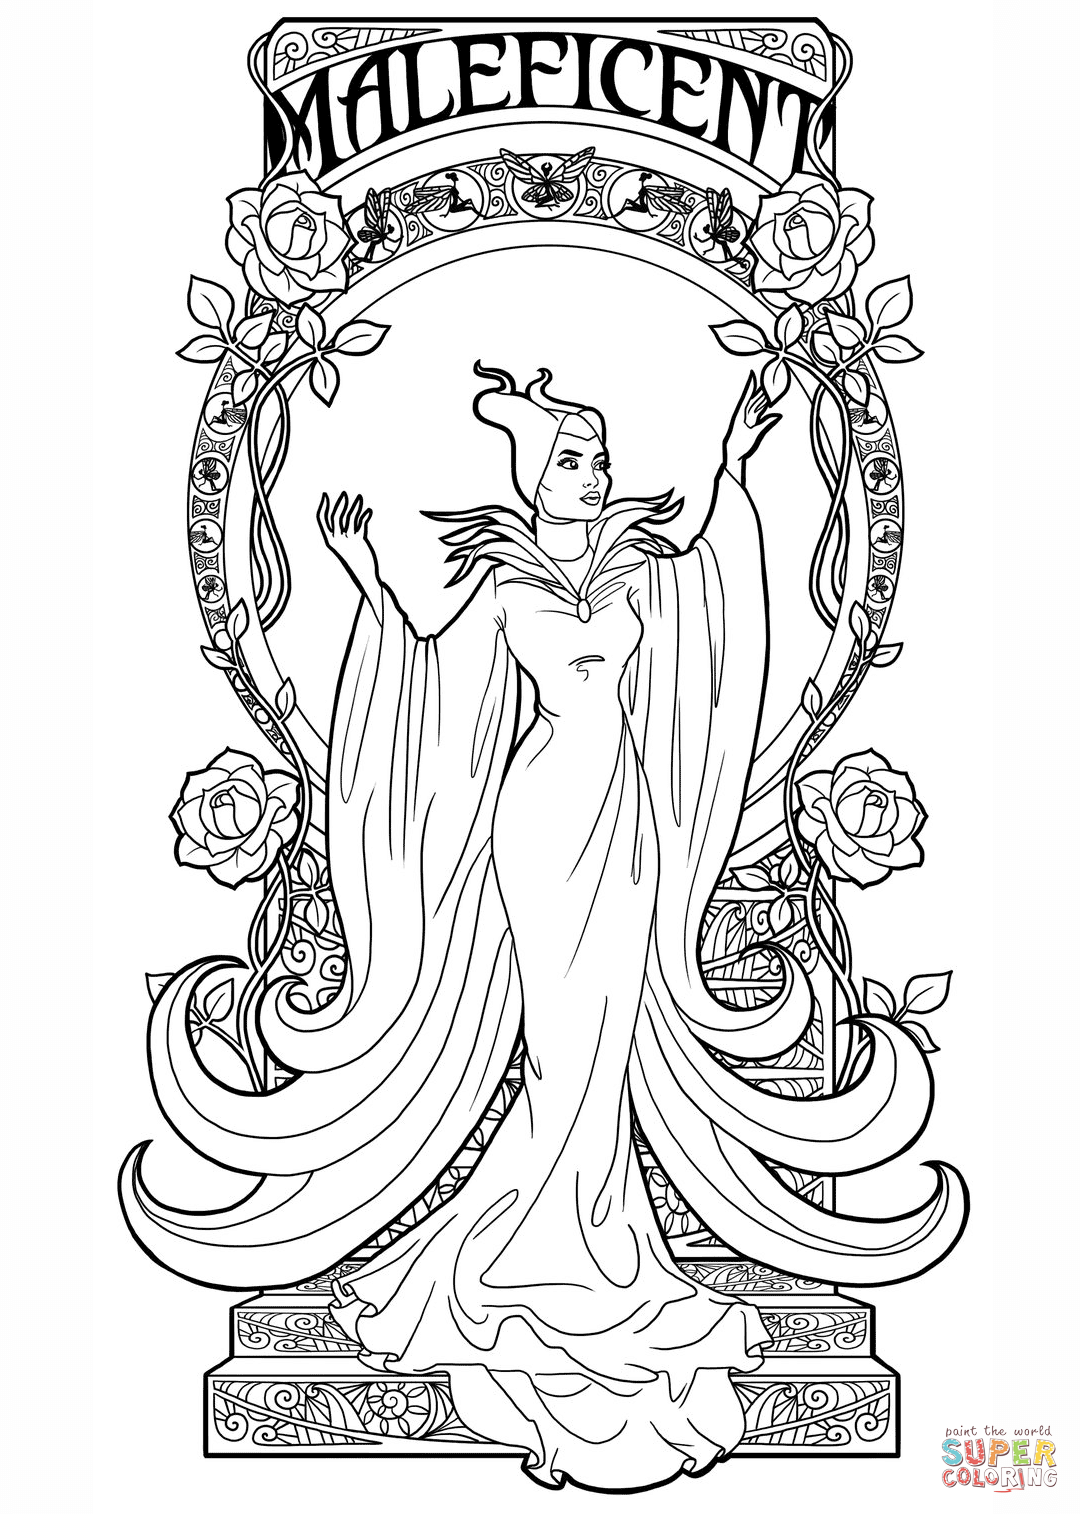 Art Nouveau Maleficent coloring page | Free Printable Coloring Pages